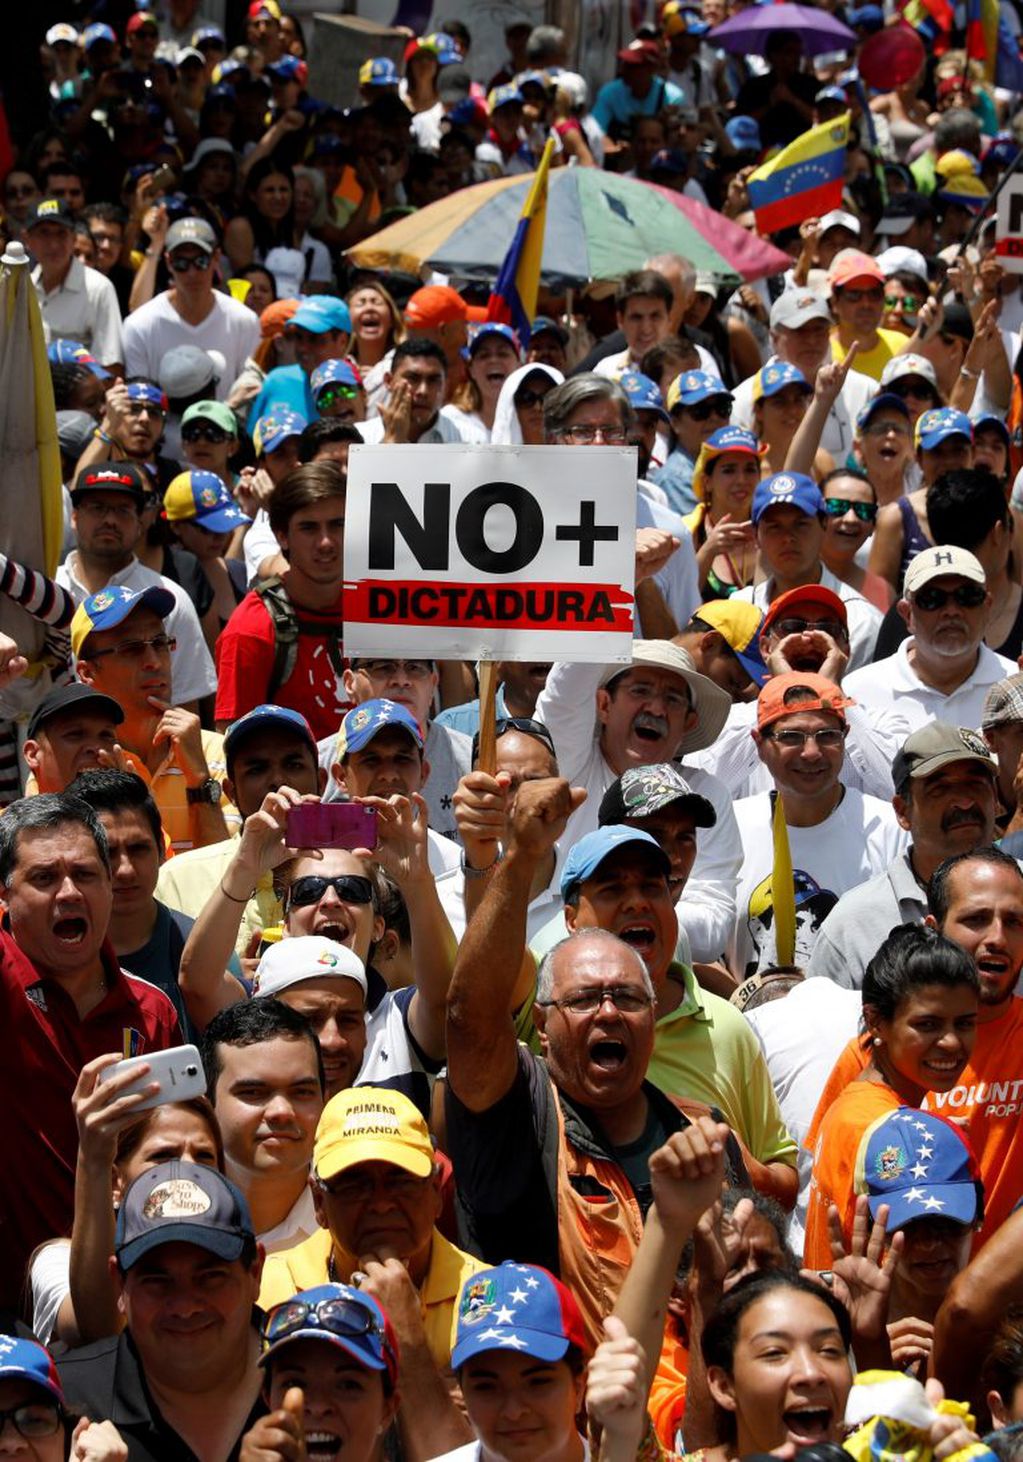 People participate in an opposition rally in Caracas, Venezuela, April 8, 2017.  The sign reads: "No more dictatorship". REUTERS/Carlos Garcia Rawlins